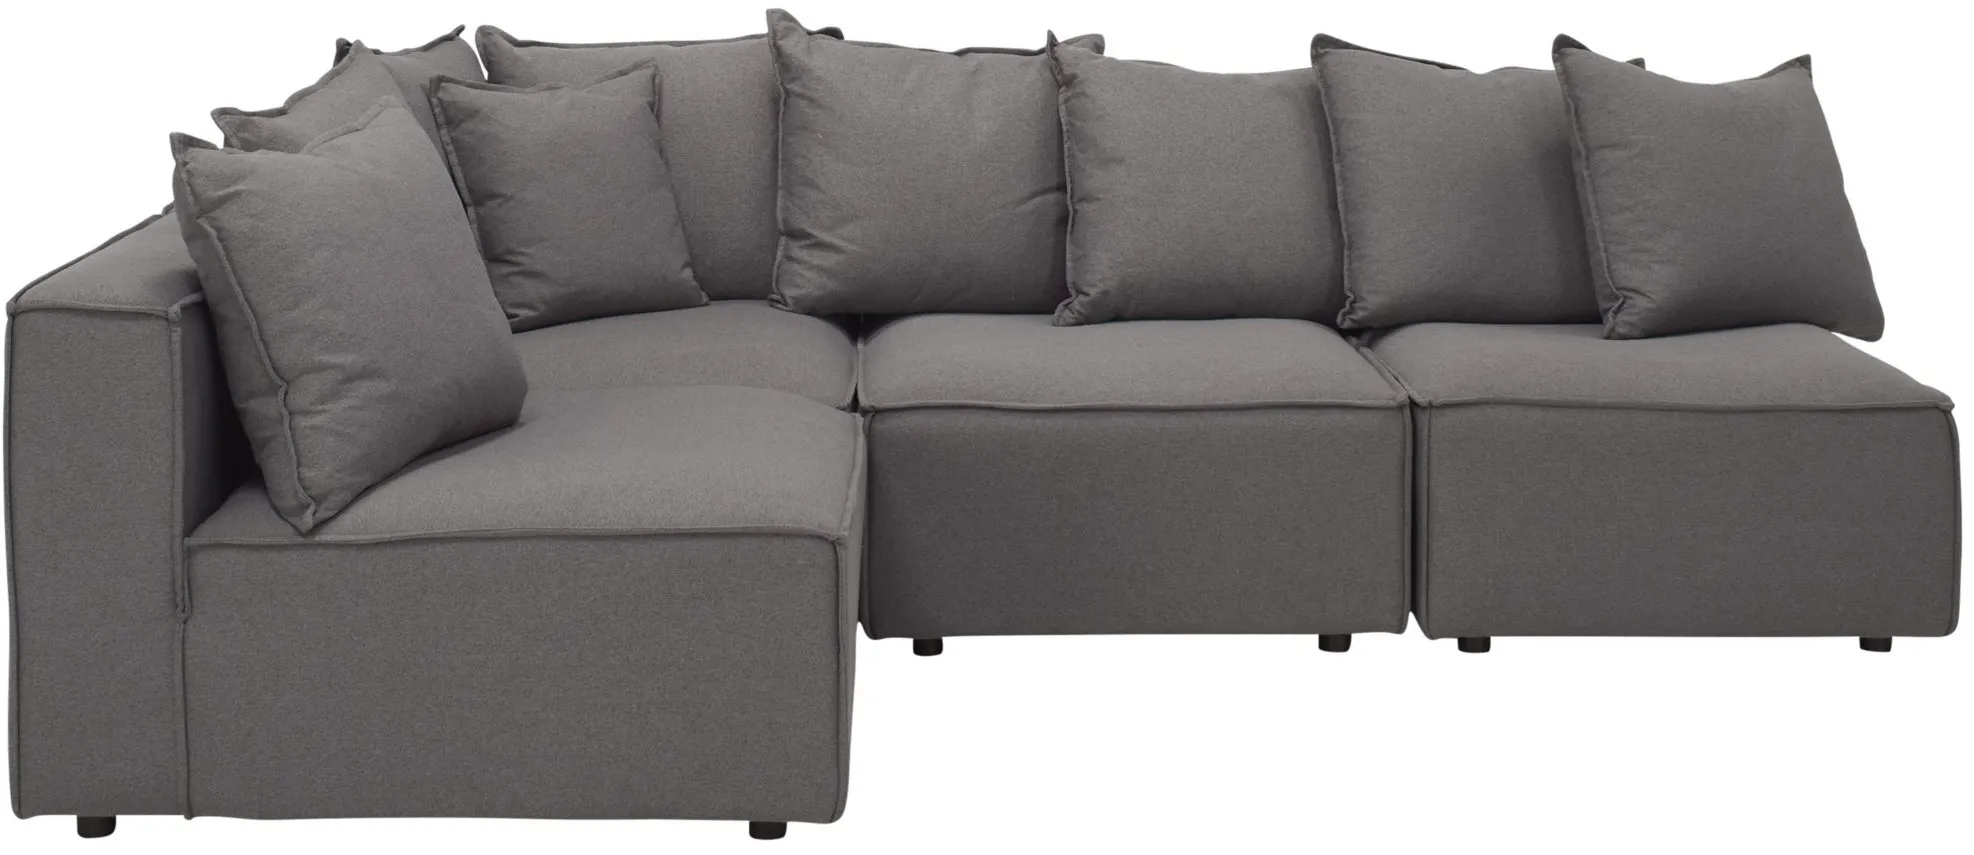 Loris Chenille 4-pc. Pit Sectional in Gray by Aria Designs